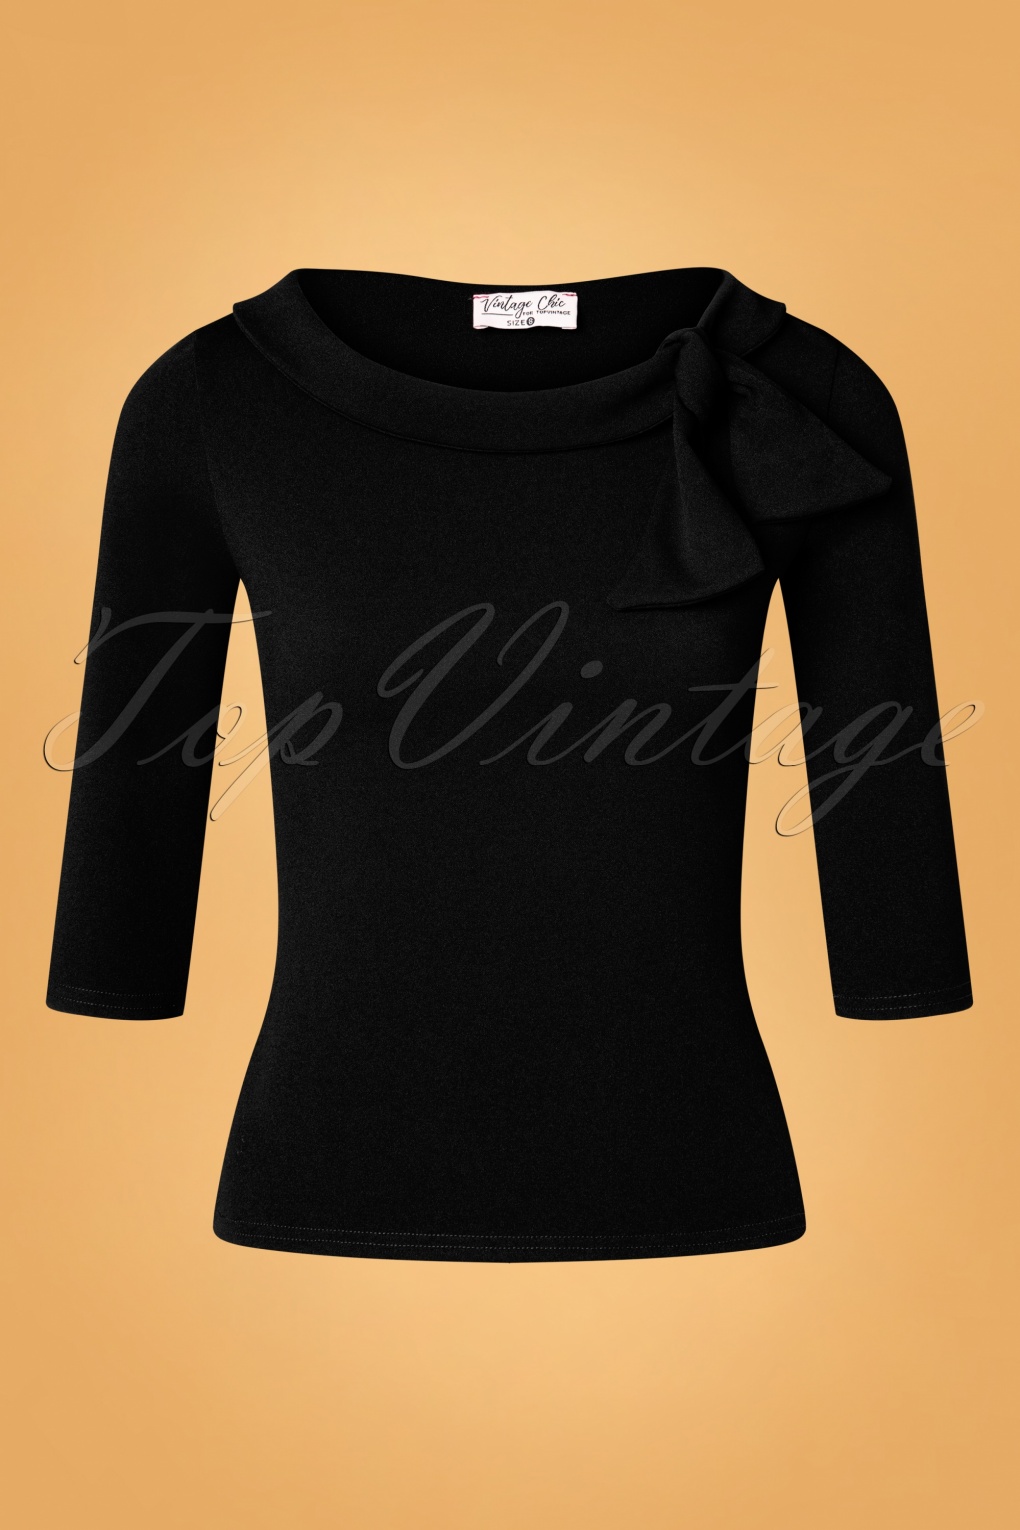 50s Belle Bow Top in Black